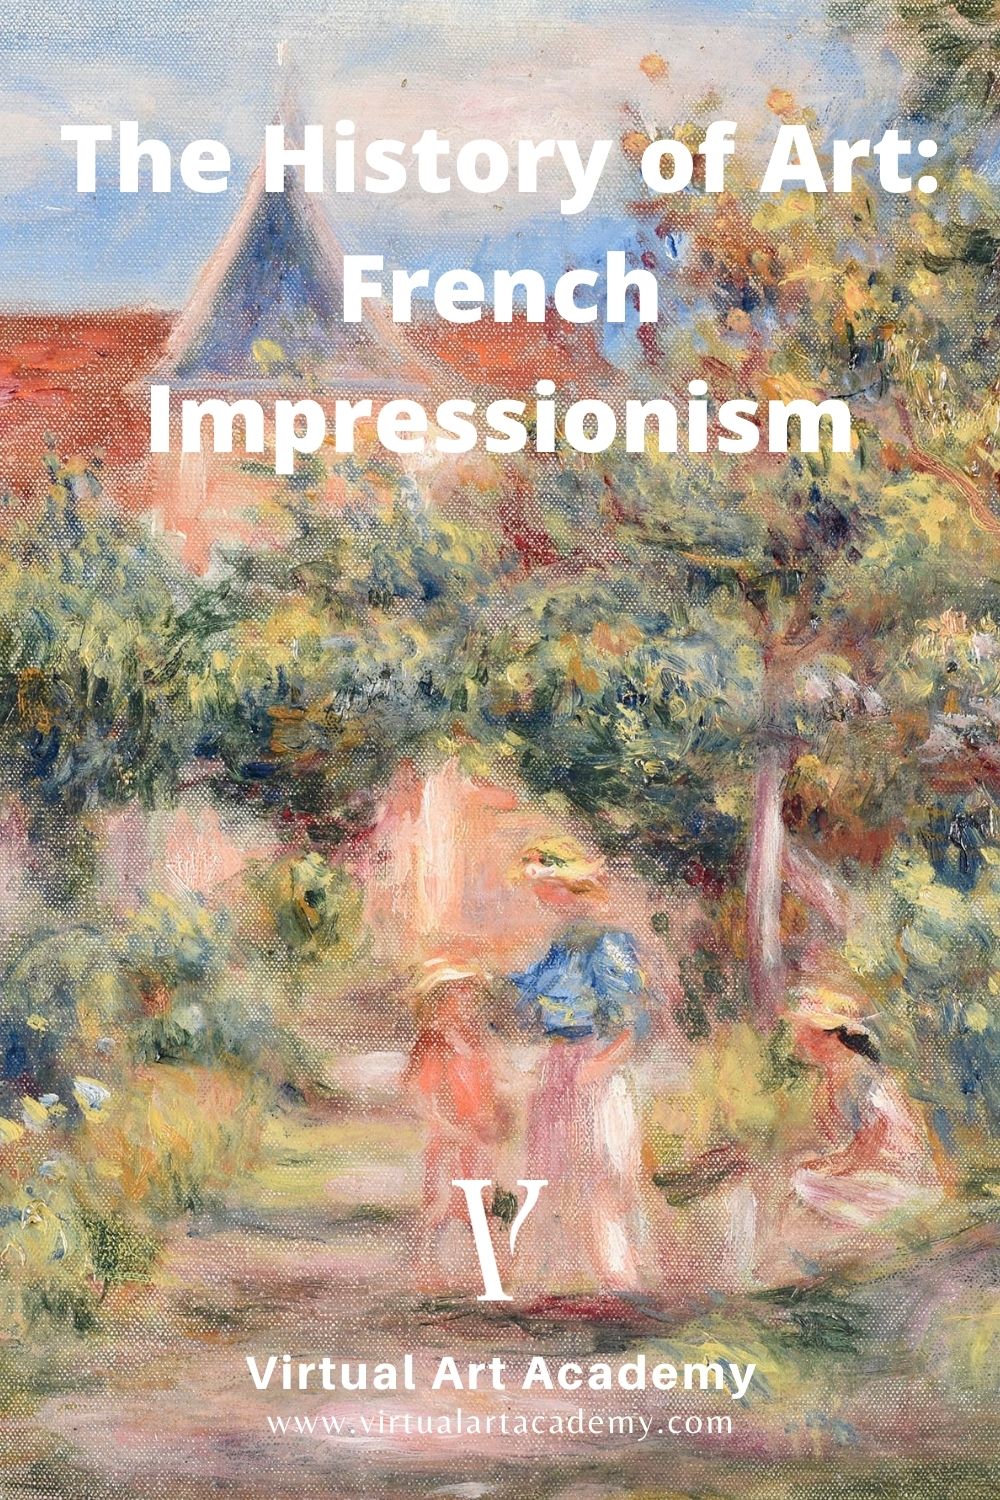 The History Of Art: French Impressionism